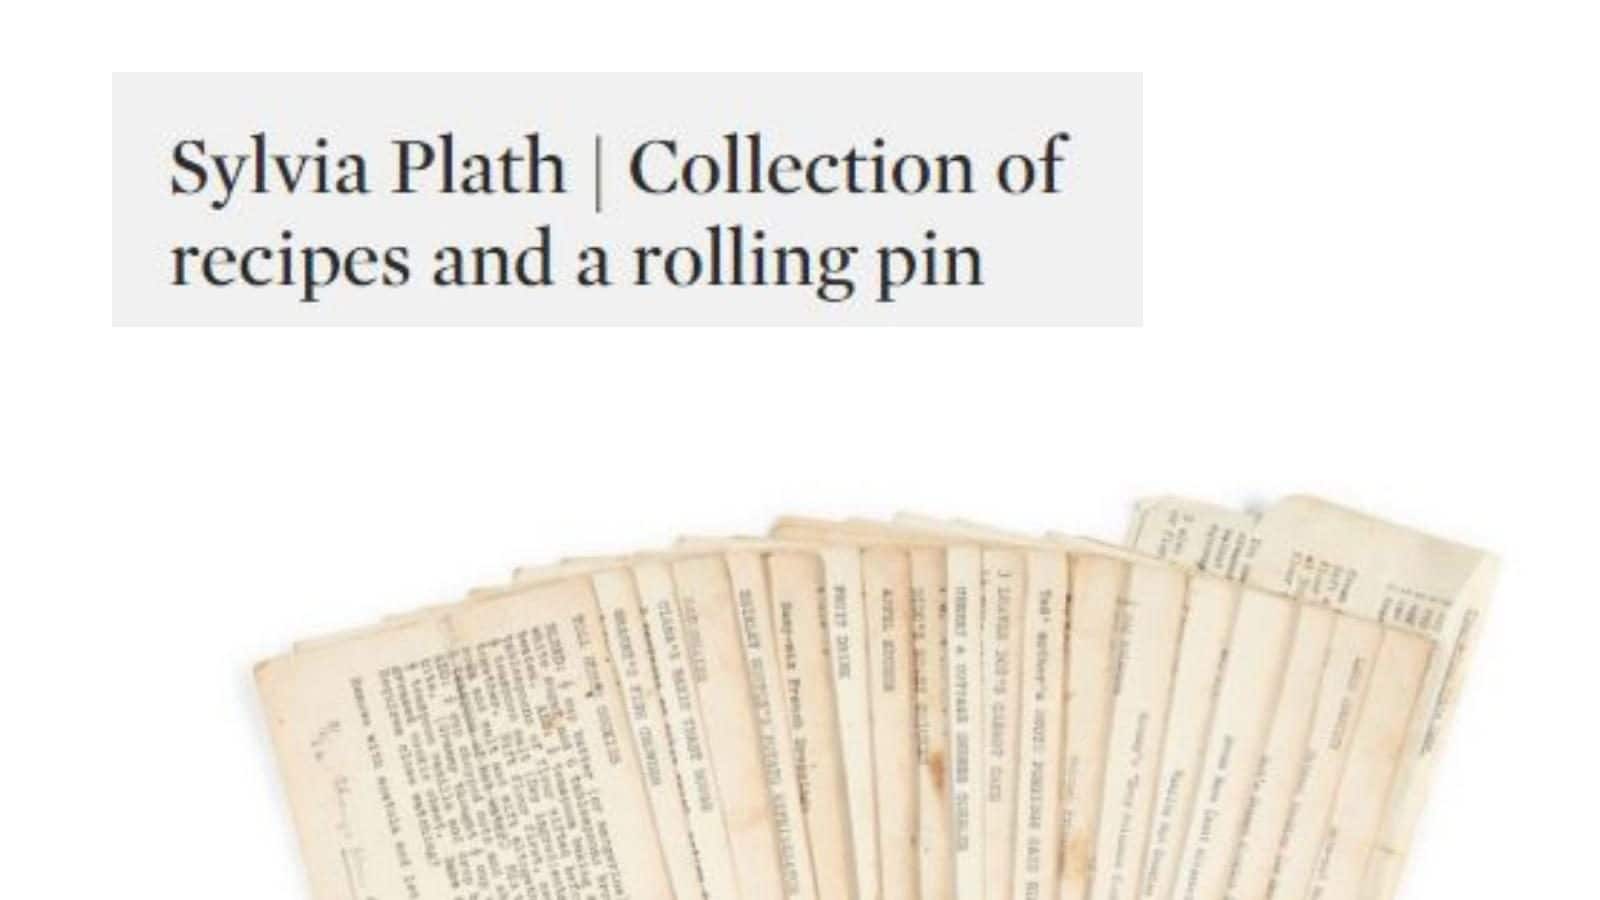 Sylvia Plath’s Love Letters to Ted Hughes, Rolling Pin, Recipes Sell at Auction